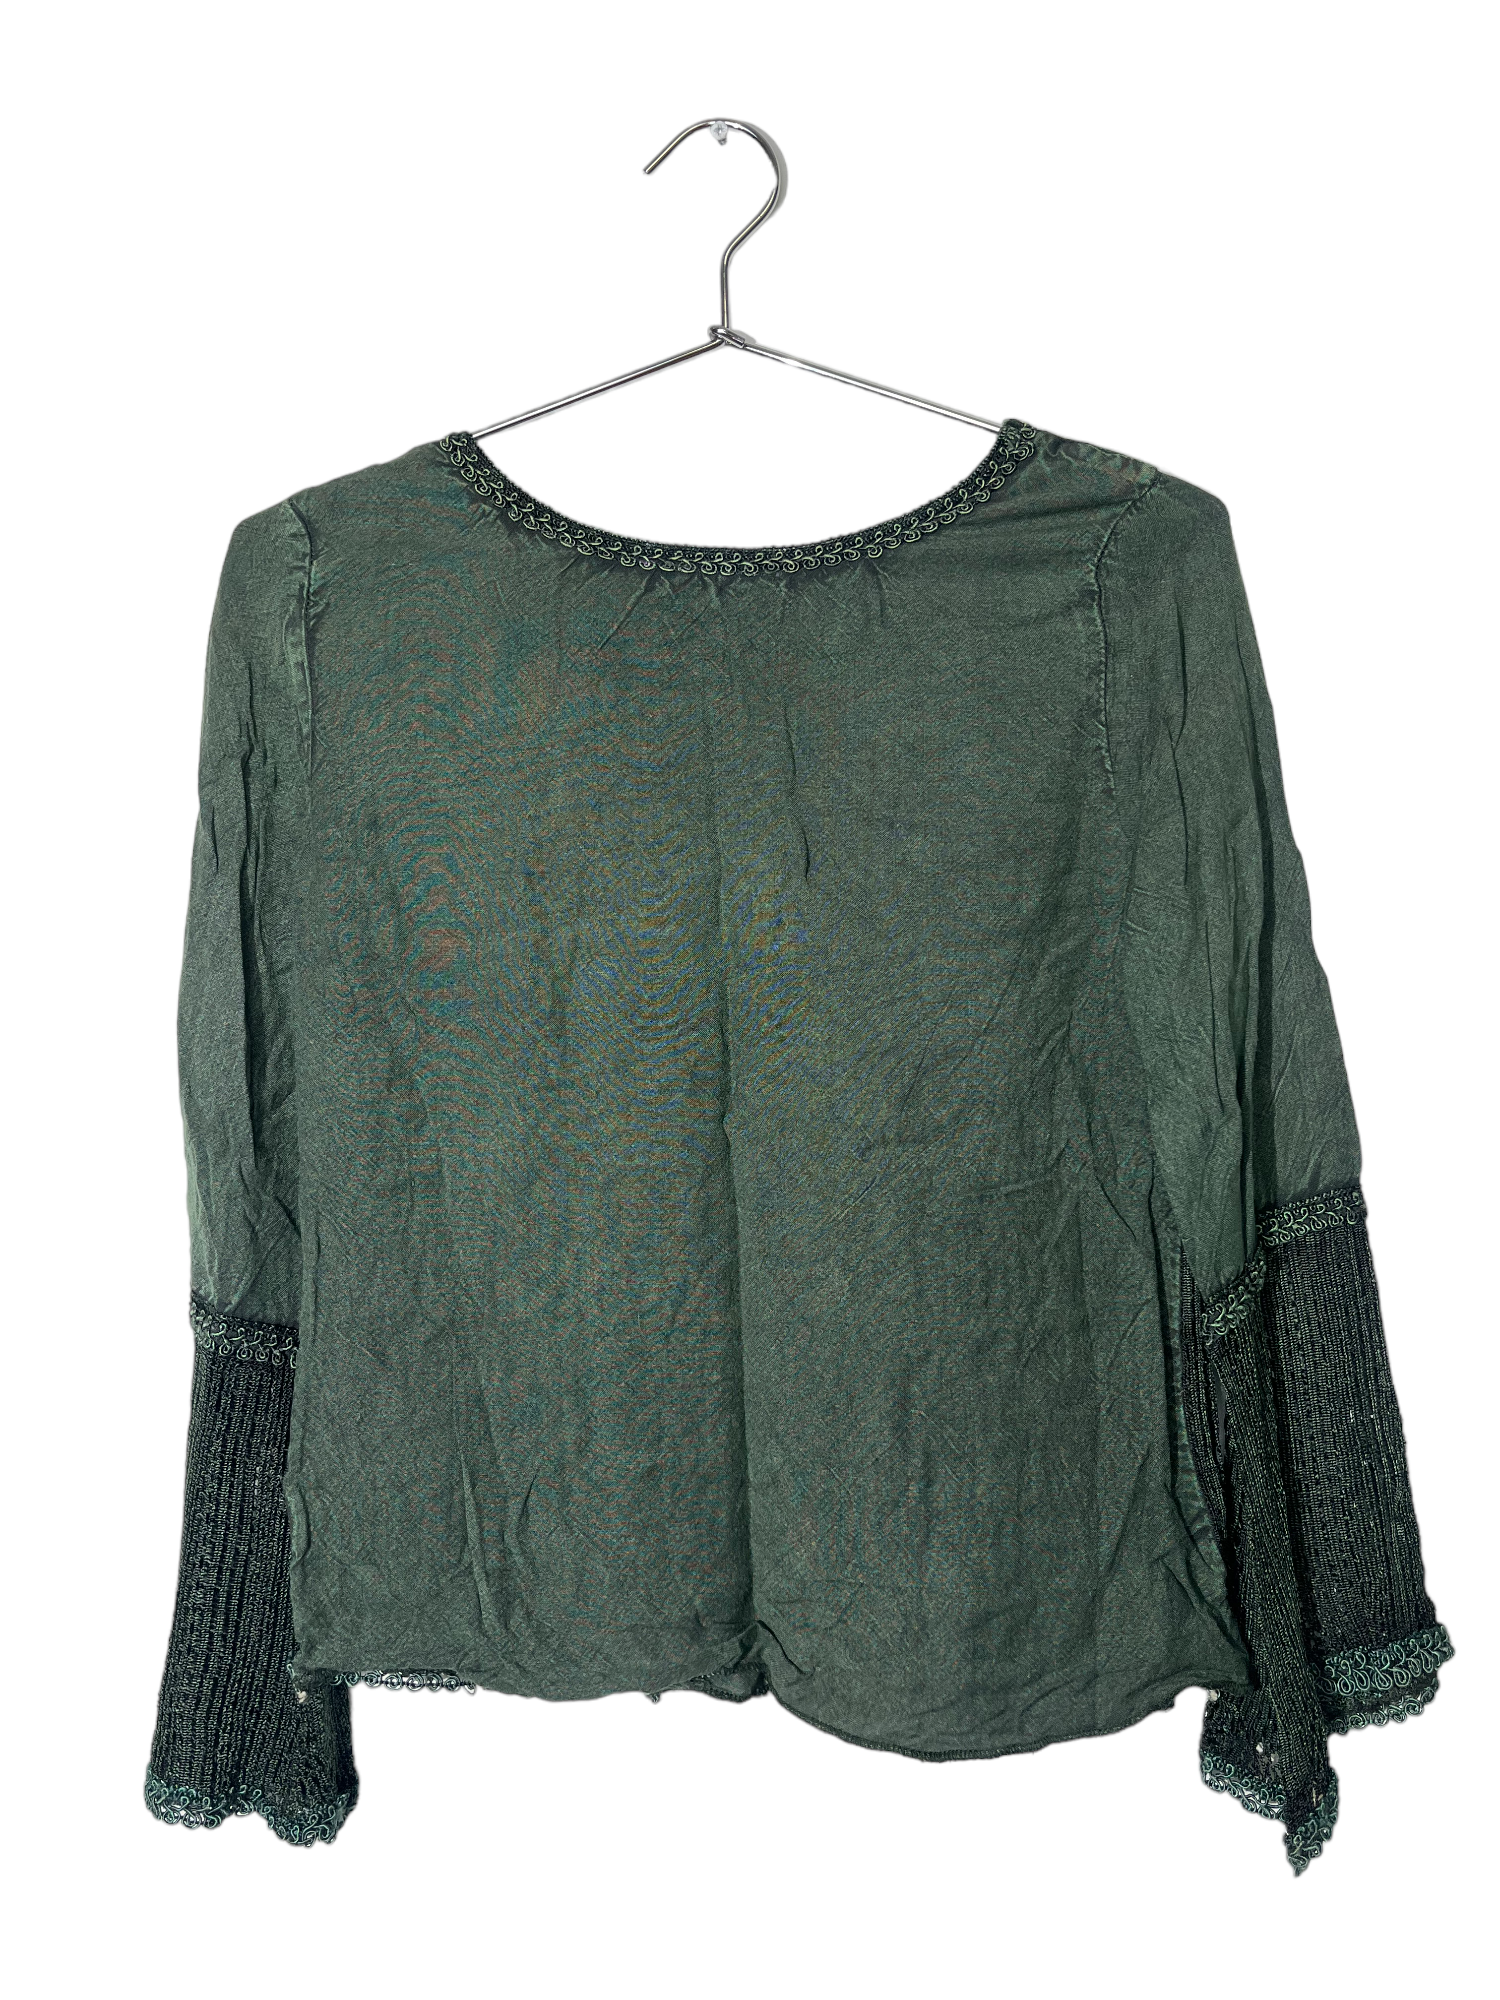 Charlotte’s Green Bell Sleeve Embroidered Top